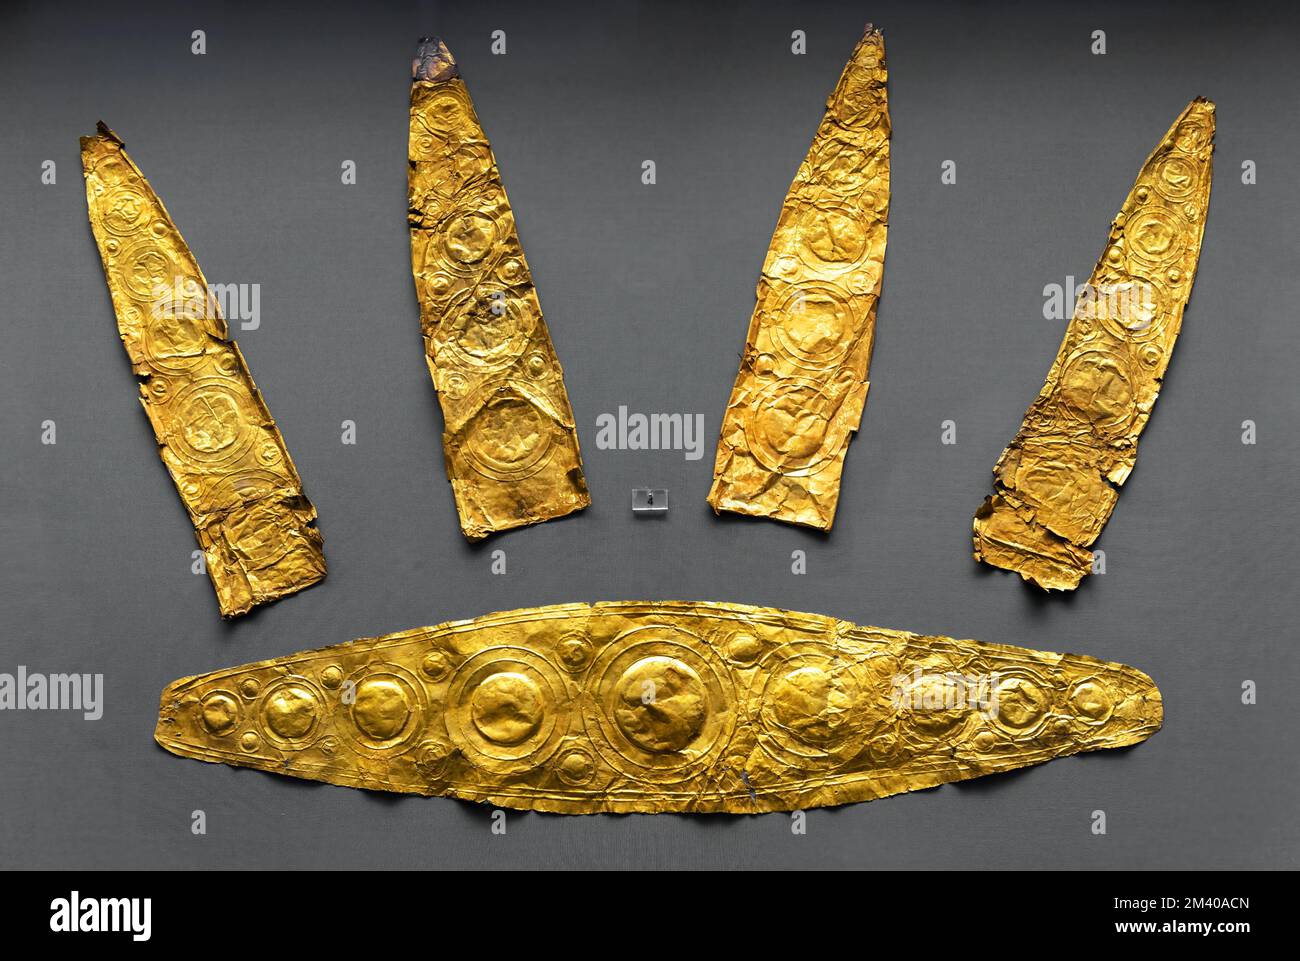 Jewel from Mycenae (Mykines) in National Archaeological Museum, Athens, Greece. Ancient Greek gold jewelry, patterned crown. Theme of history, artifac Stock Photo